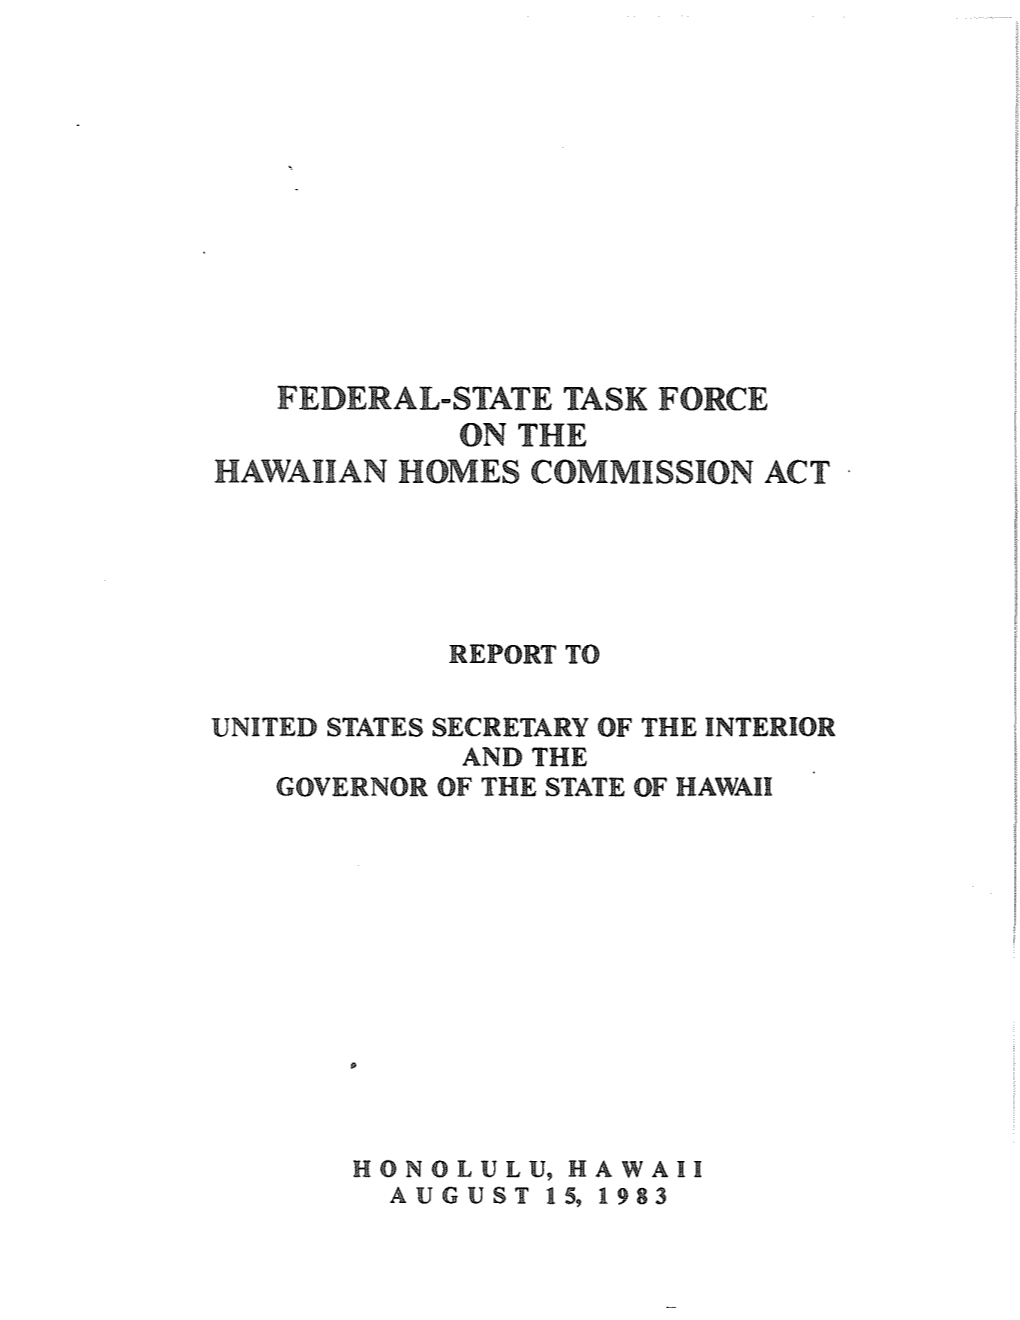 Federal-State Task Force on the Hawaiian Homes Commission Act ·